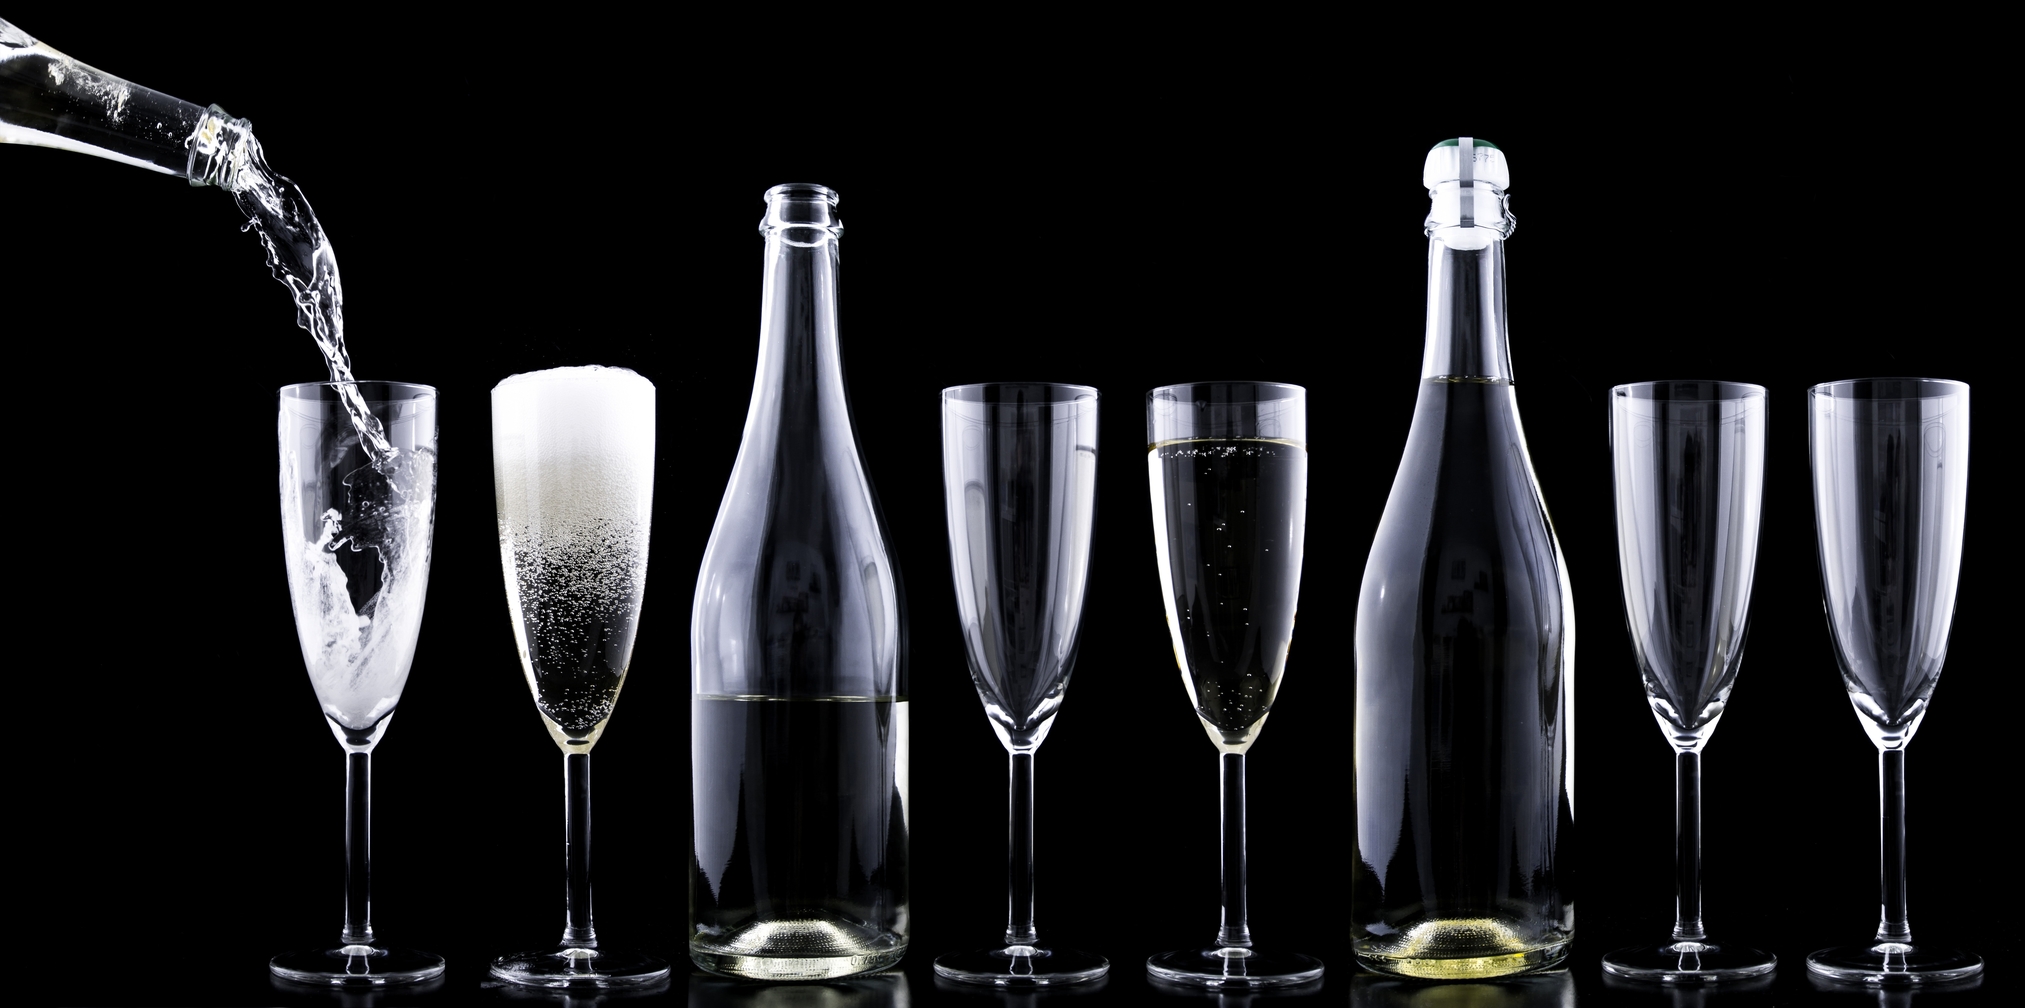 Champagne bottles and glasses image